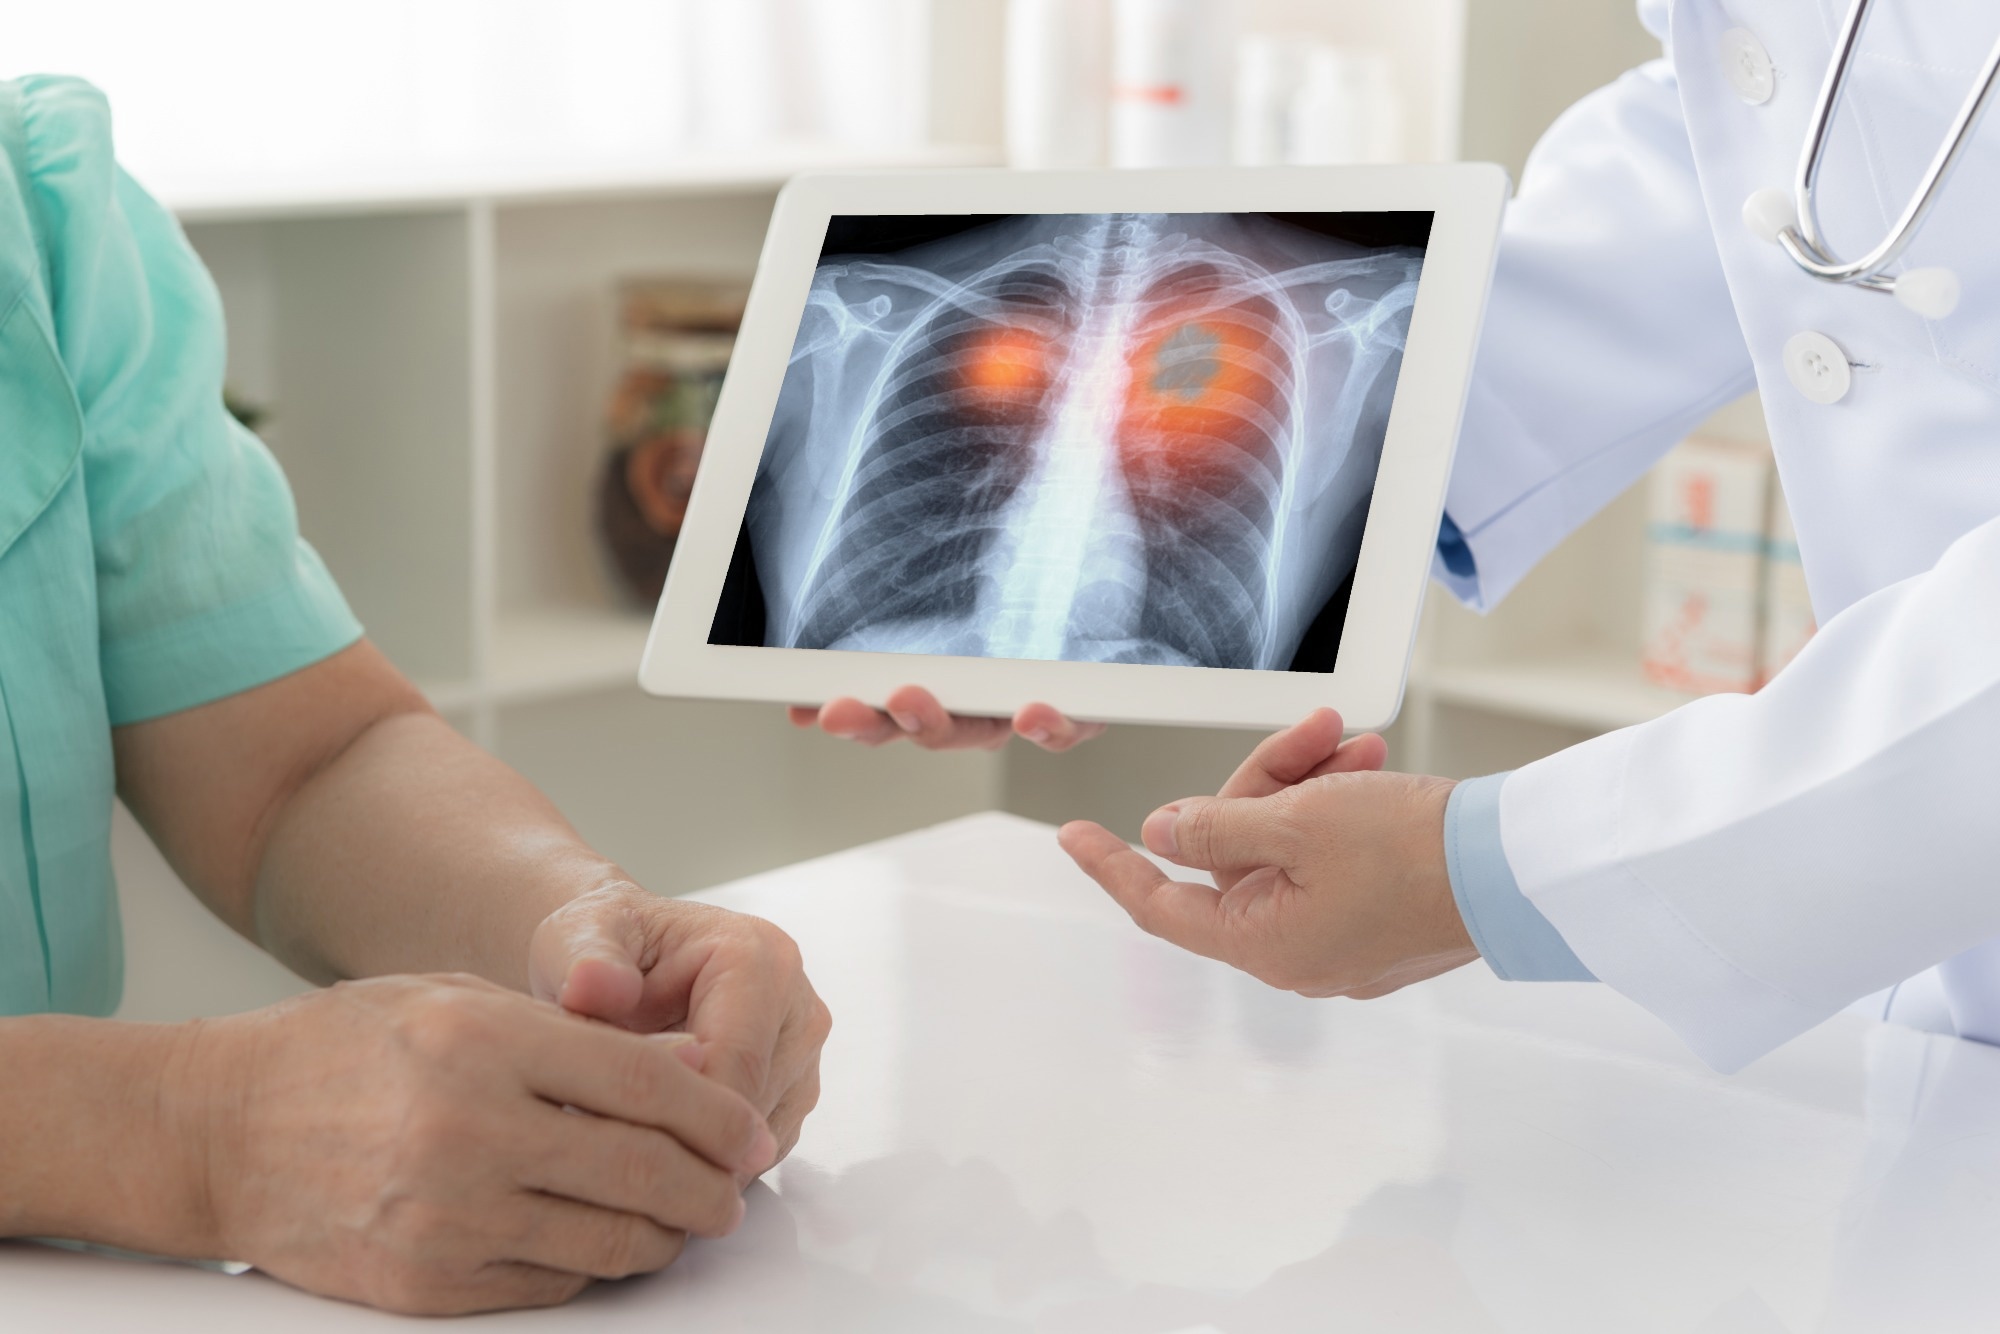 Study: Inflammation in the tumor-adjacent lung as a predictor of clinical outcome in lung adenocarcinoma. Image Credit: create jobs 51/Shutterstock.com